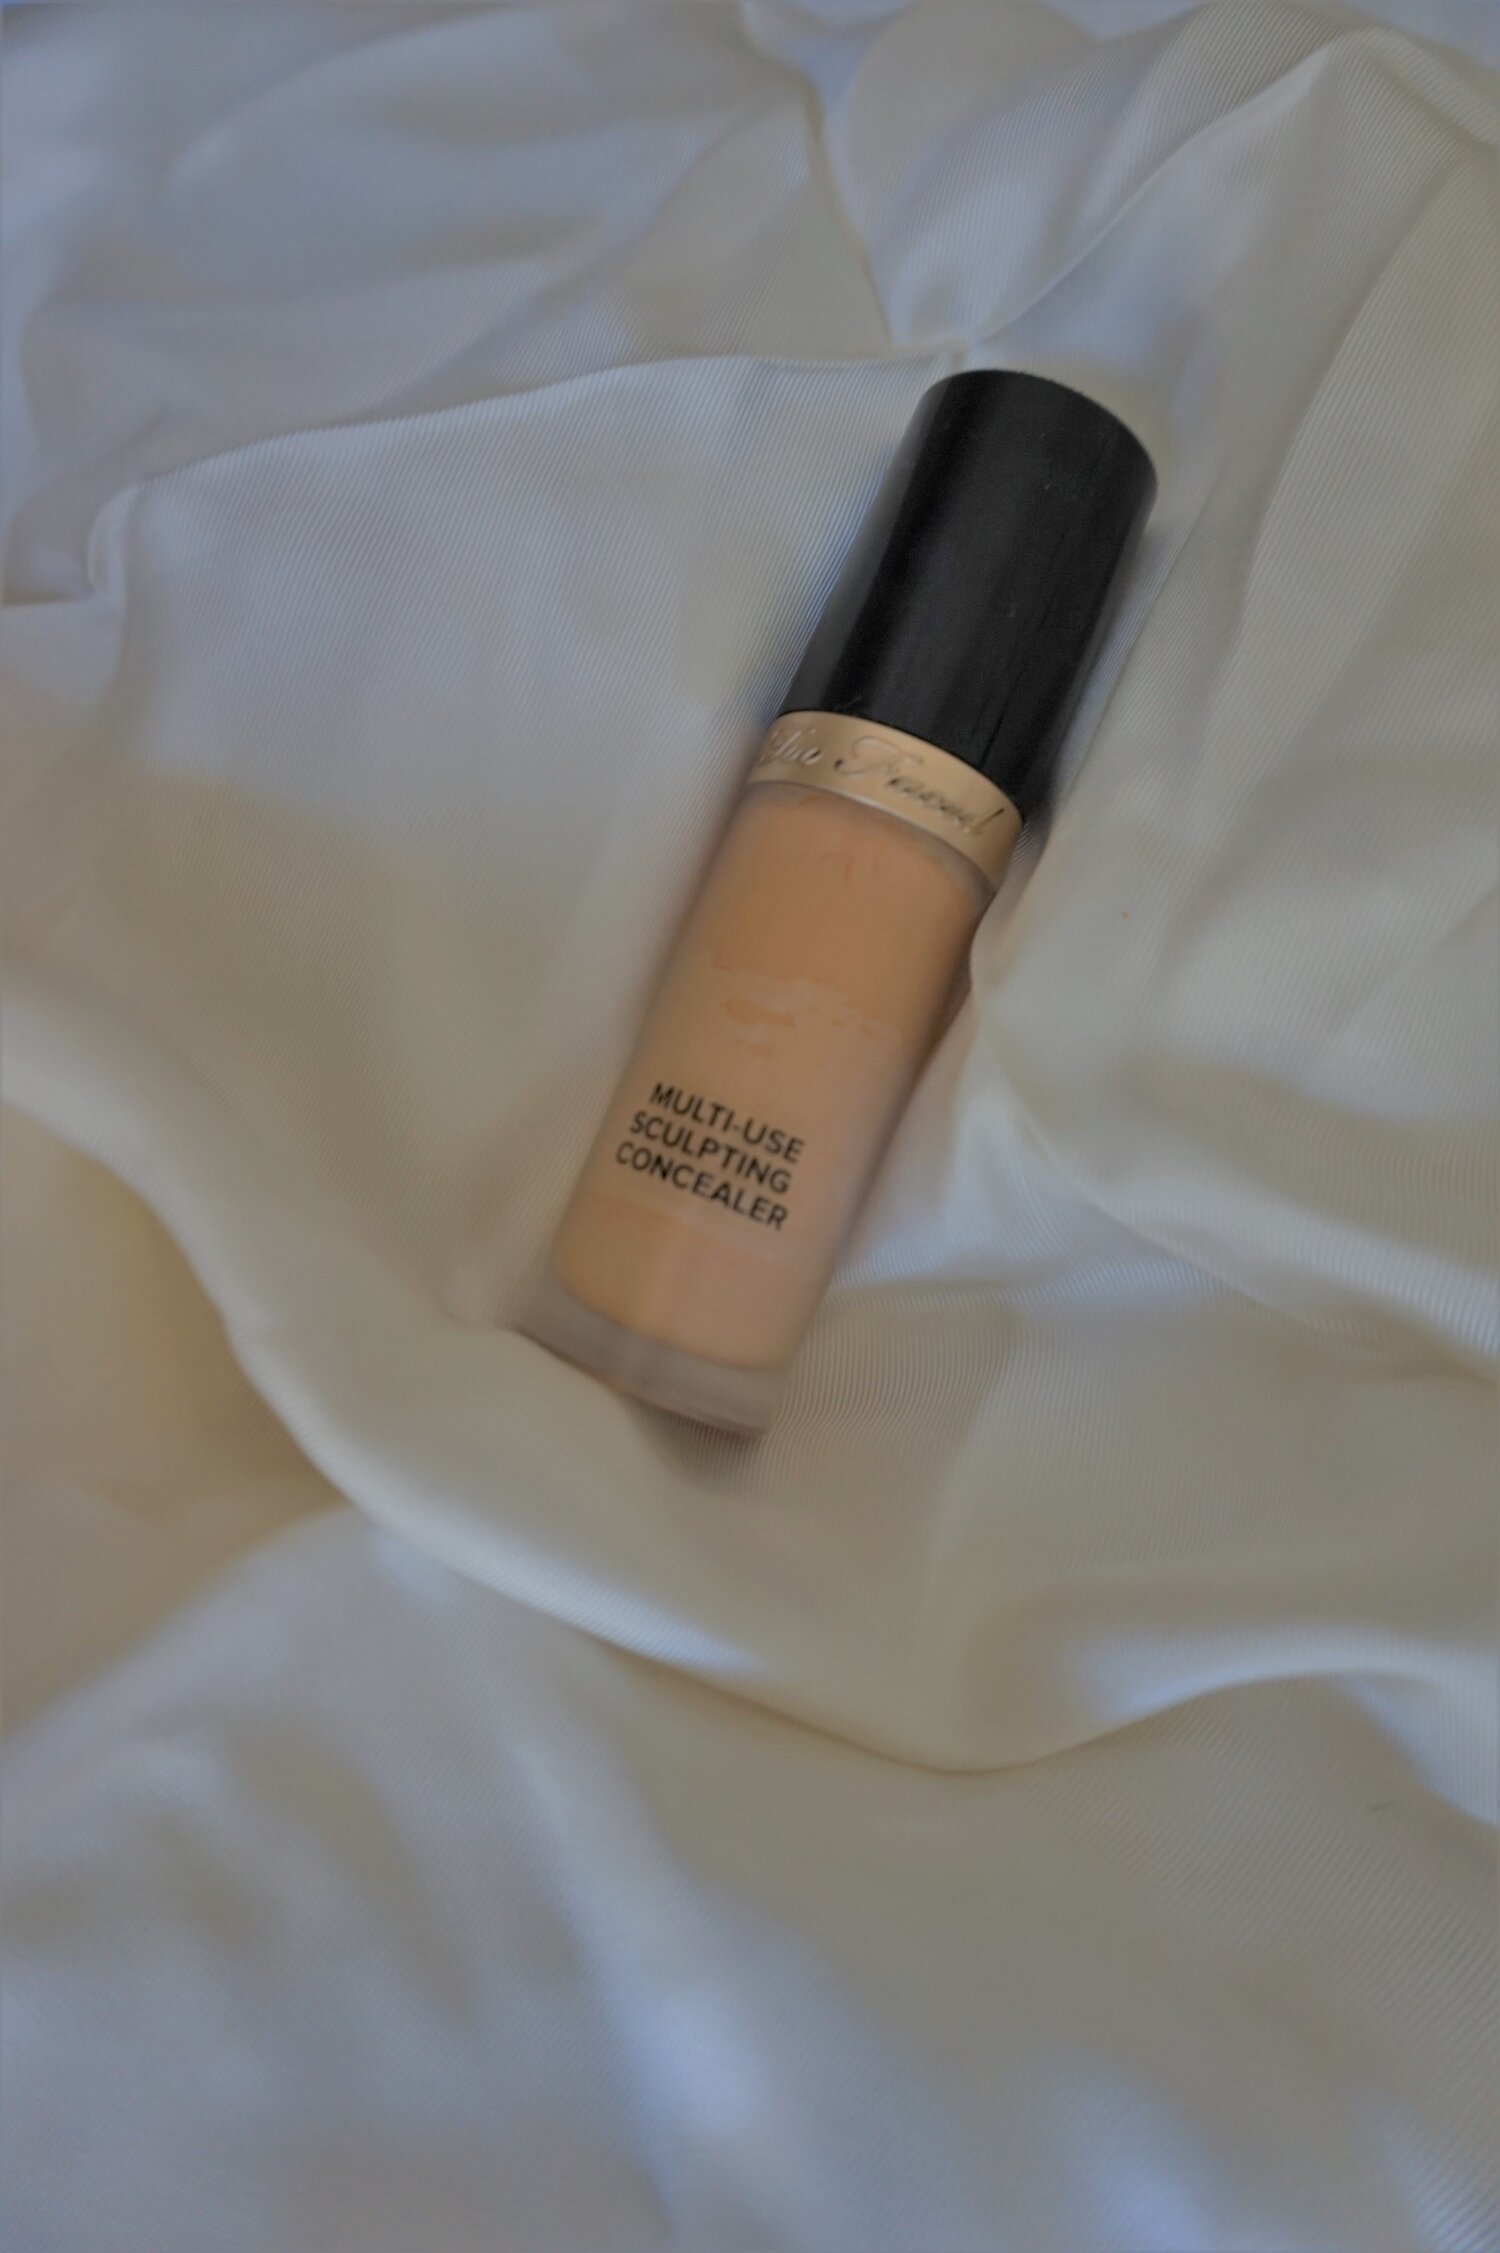 Too Faced Multi-use full coverage concealer